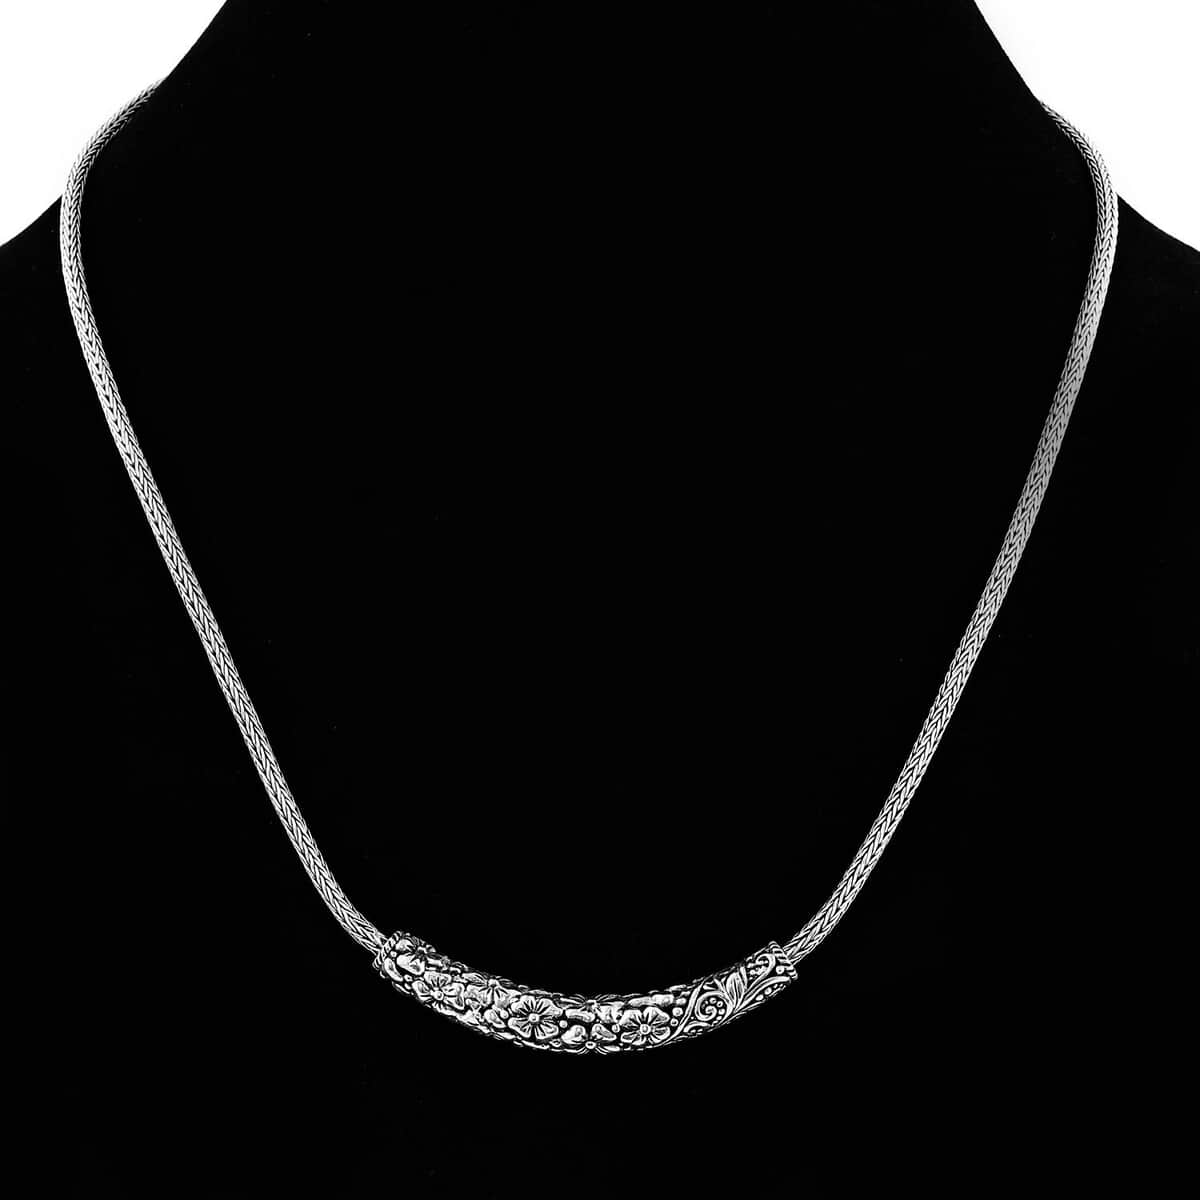 Bali Legacy Sterling Silver Frangipani with Filigree Necklace 18-19 Inches 21 Grams image number 2